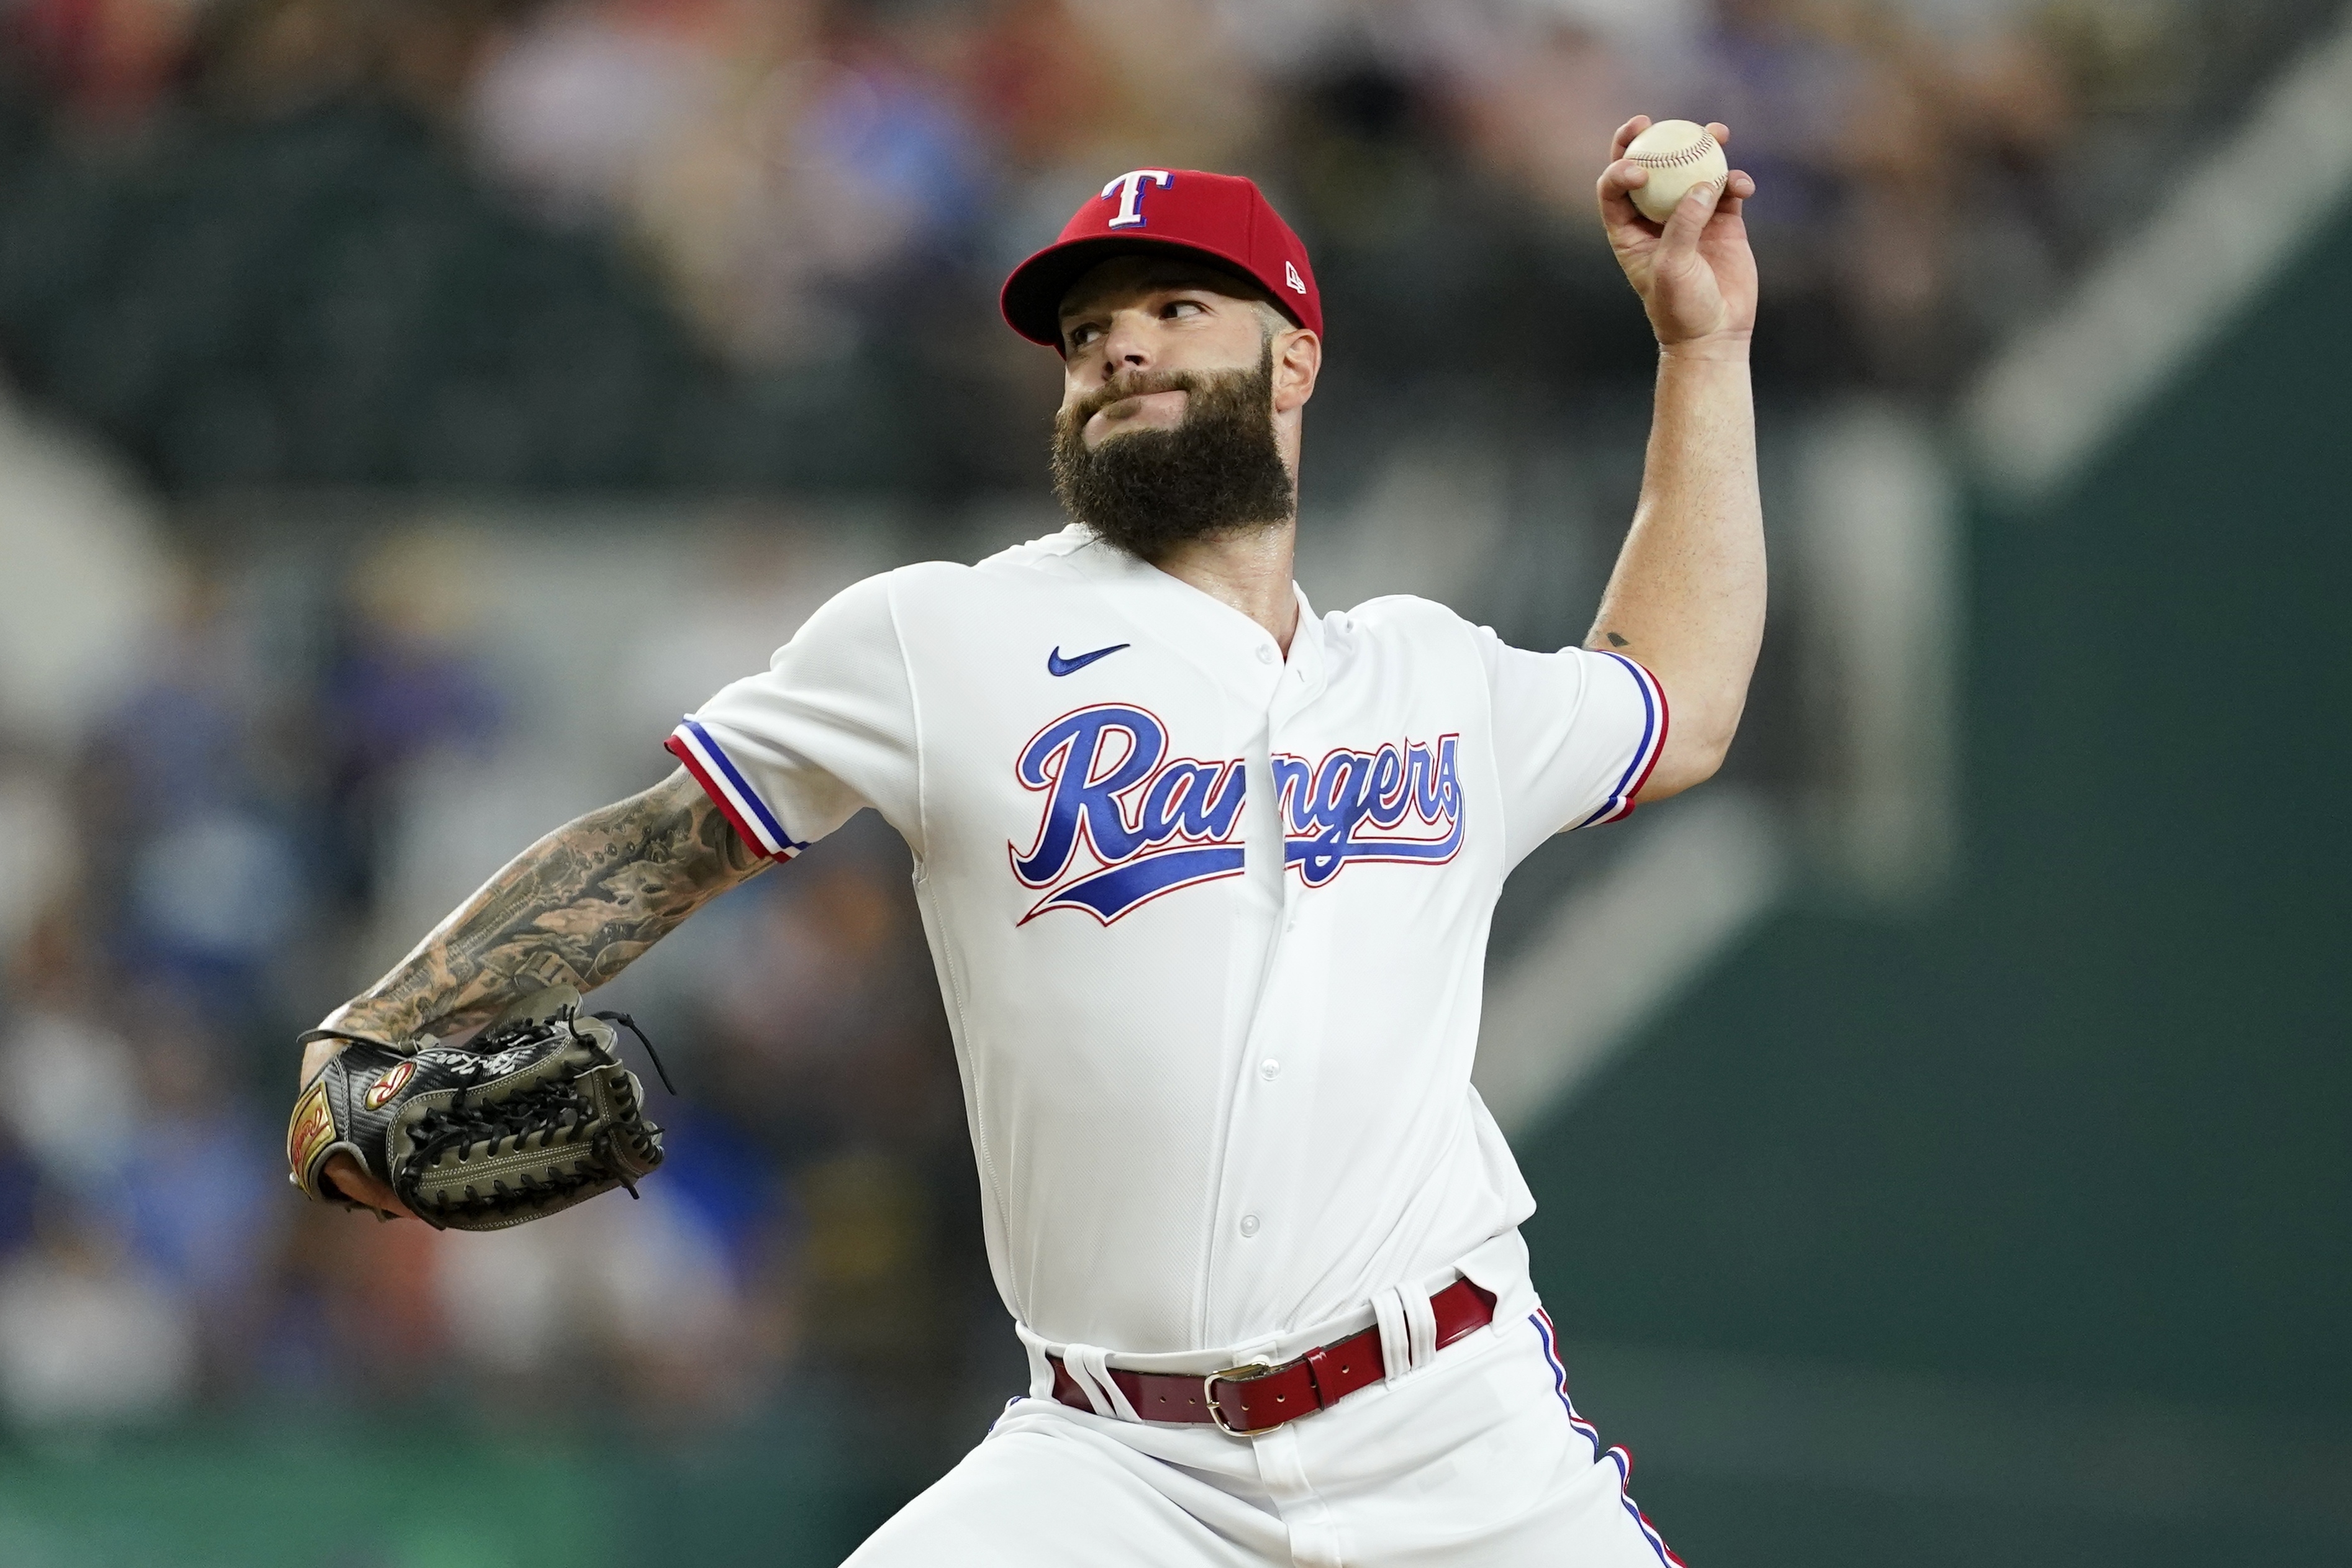 Dallas Keuchel's Rangers debut met with less-than-warm welcome